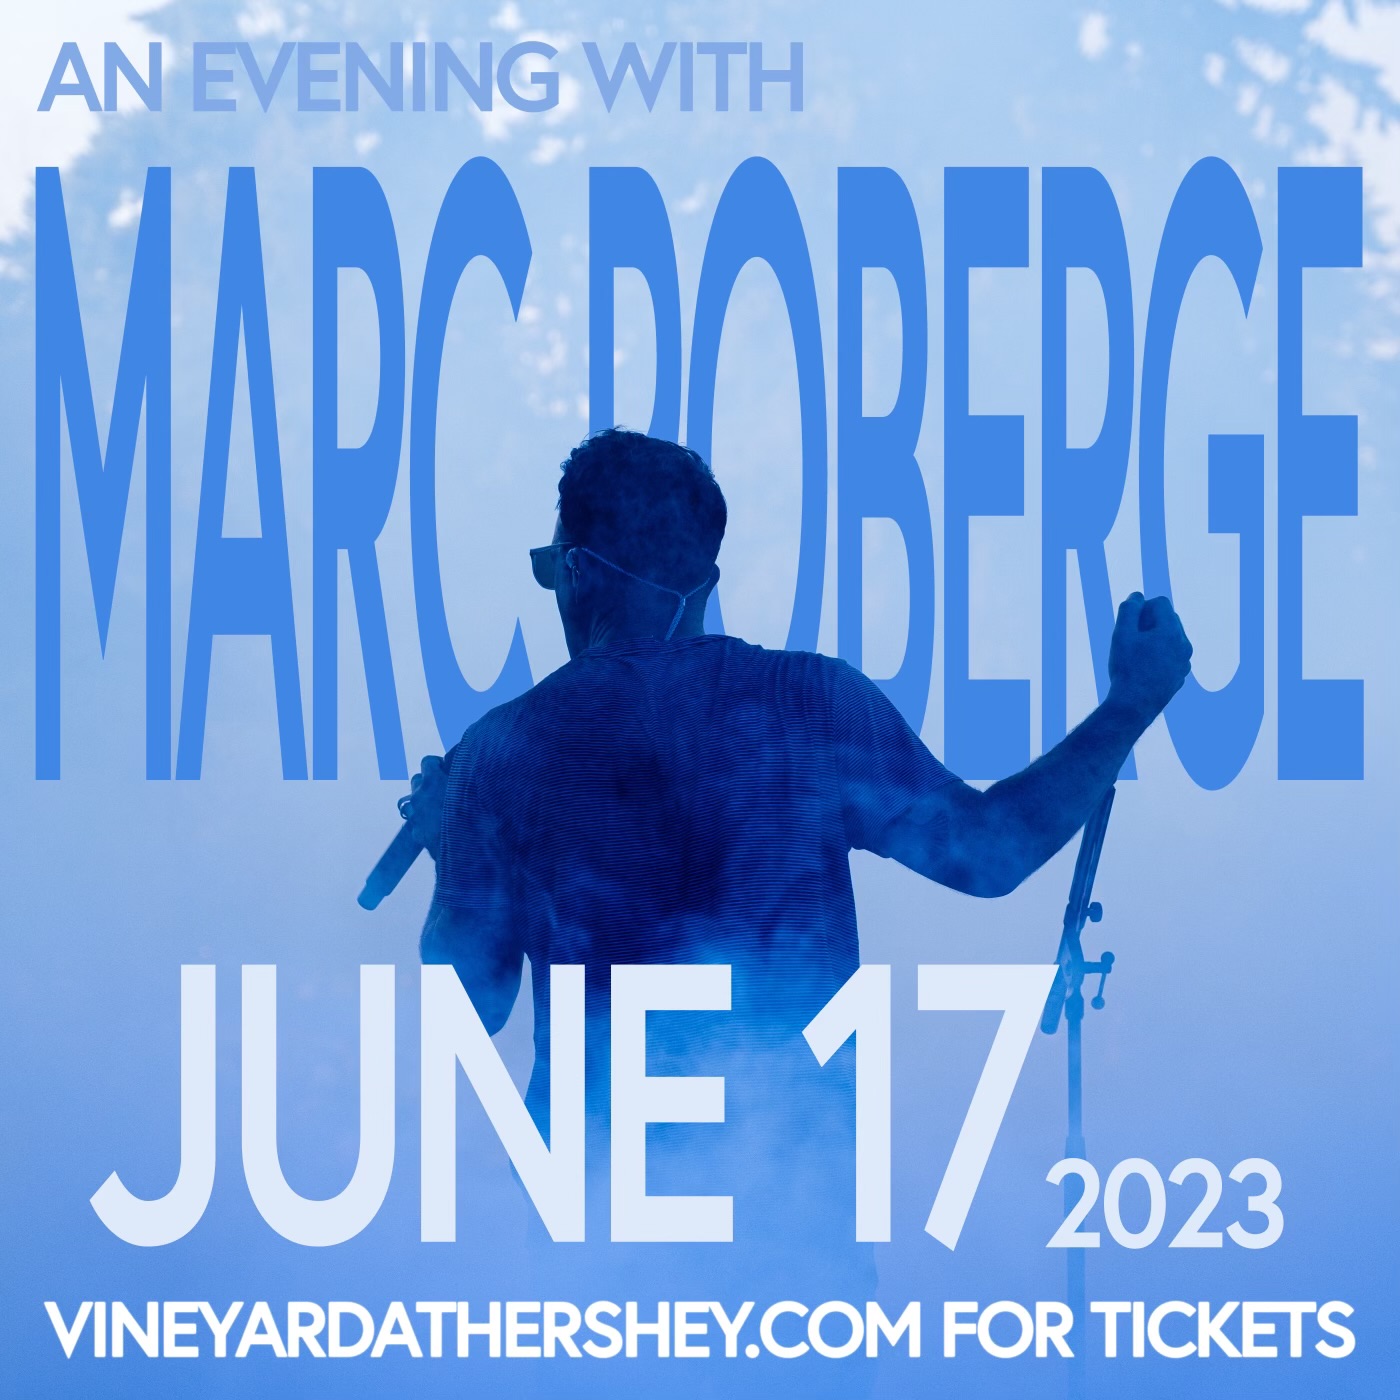 06/17/23 - An Evening with Marc Roberge - the Vineyard at Hershey